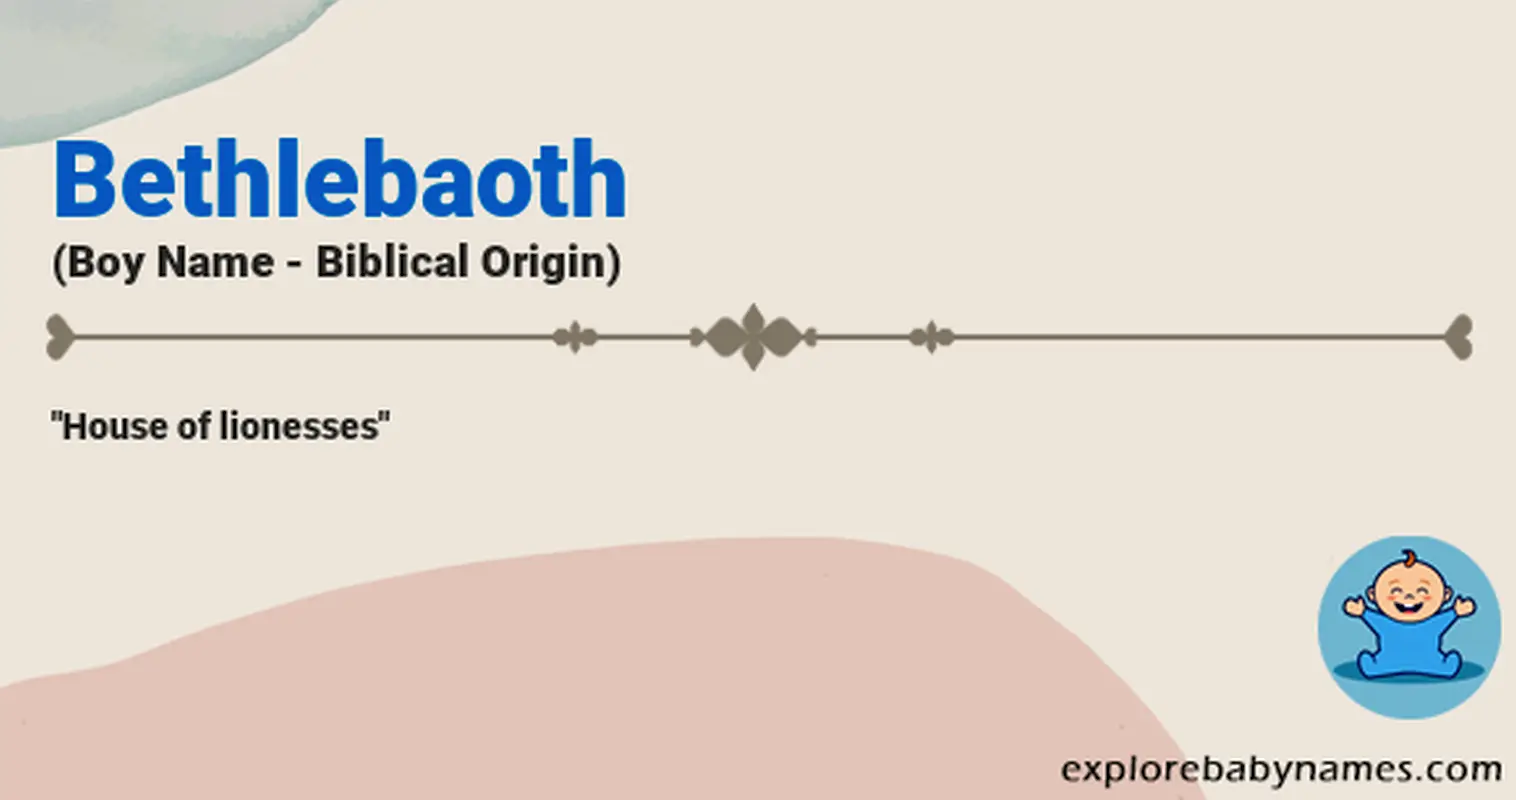 Meaning of Bethlebaoth